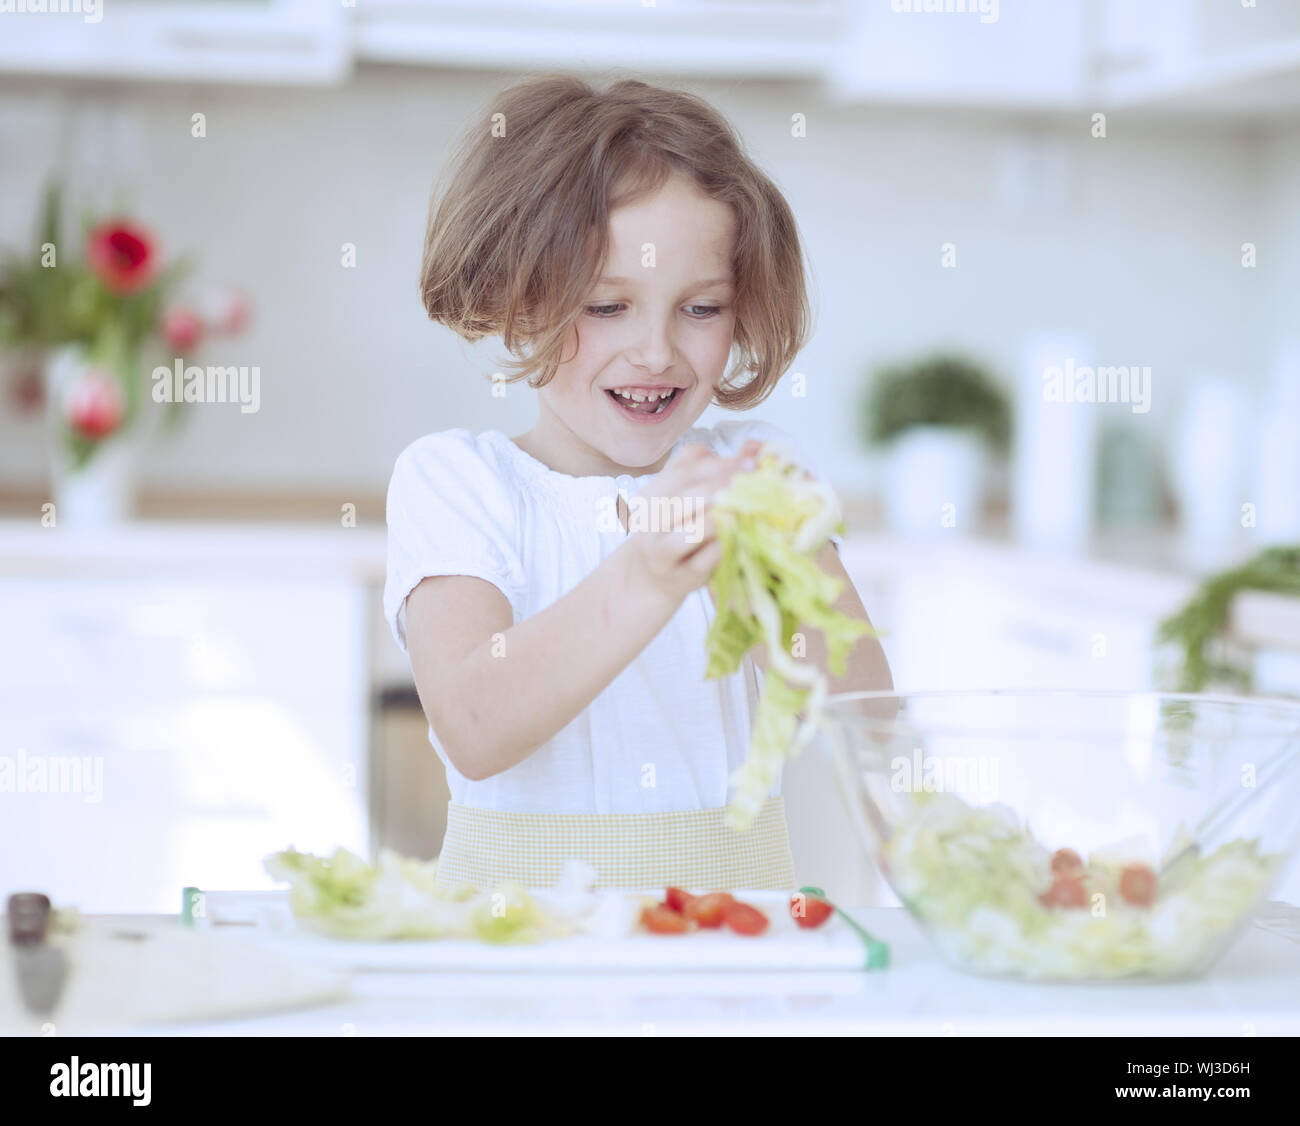 Young girl placing lettuce in salad bowl Stock Photo